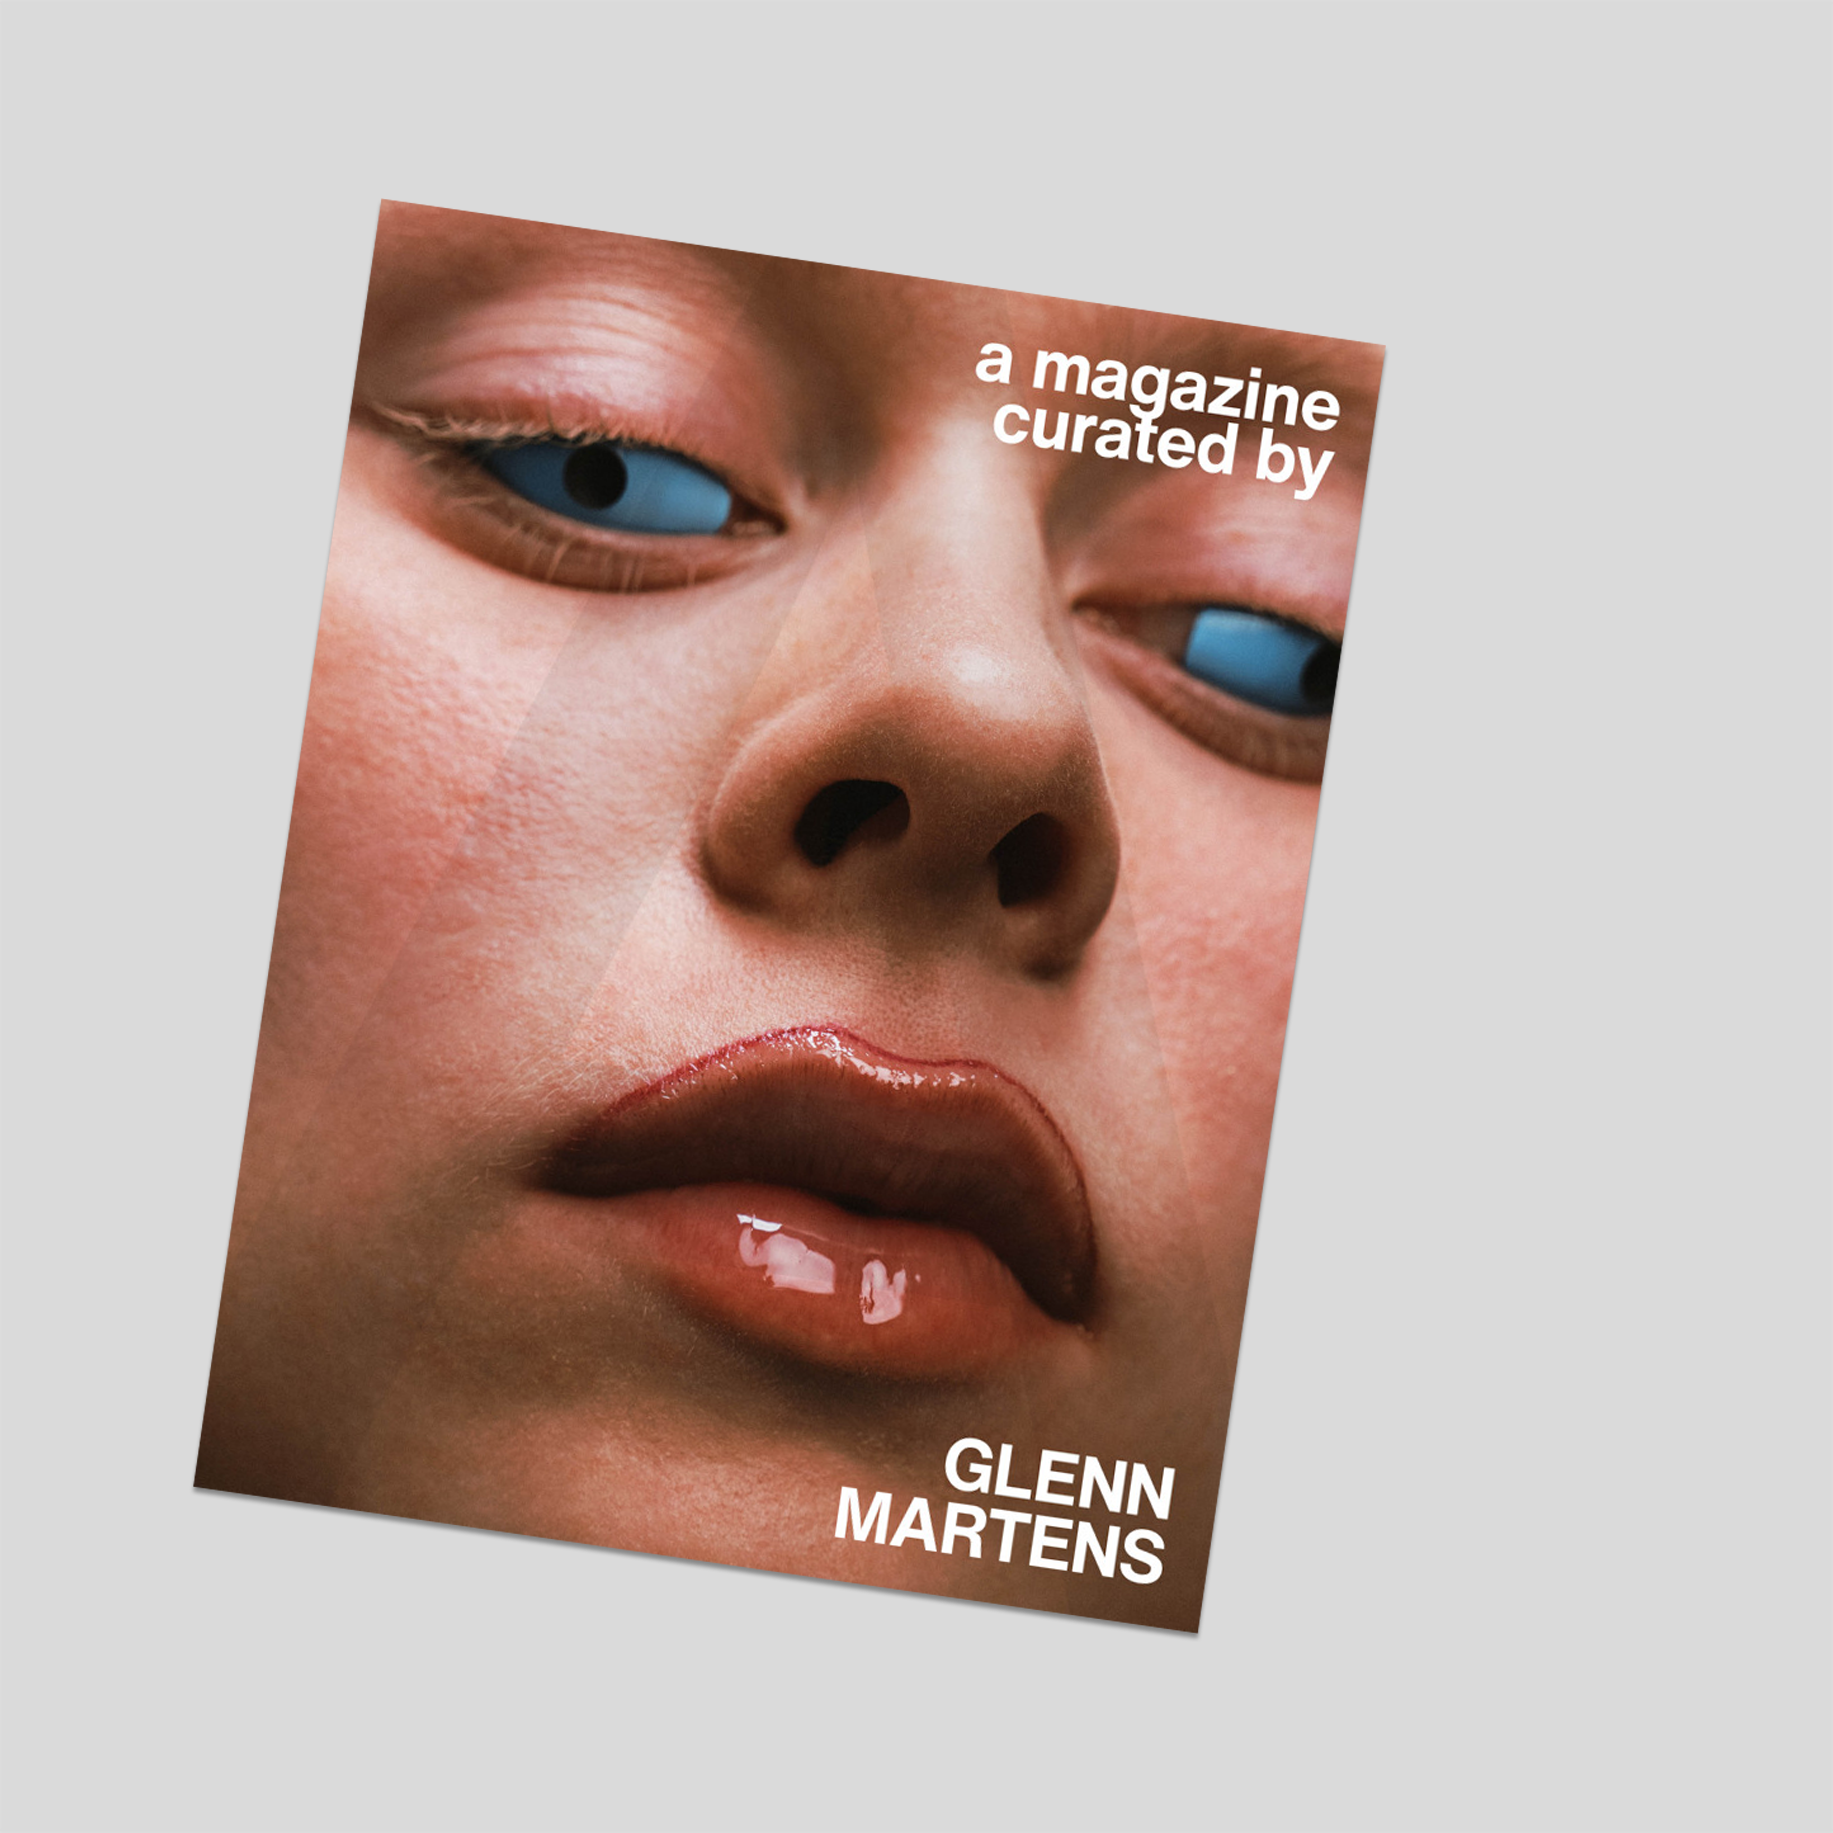 A magazine curated by: Glenn Martens